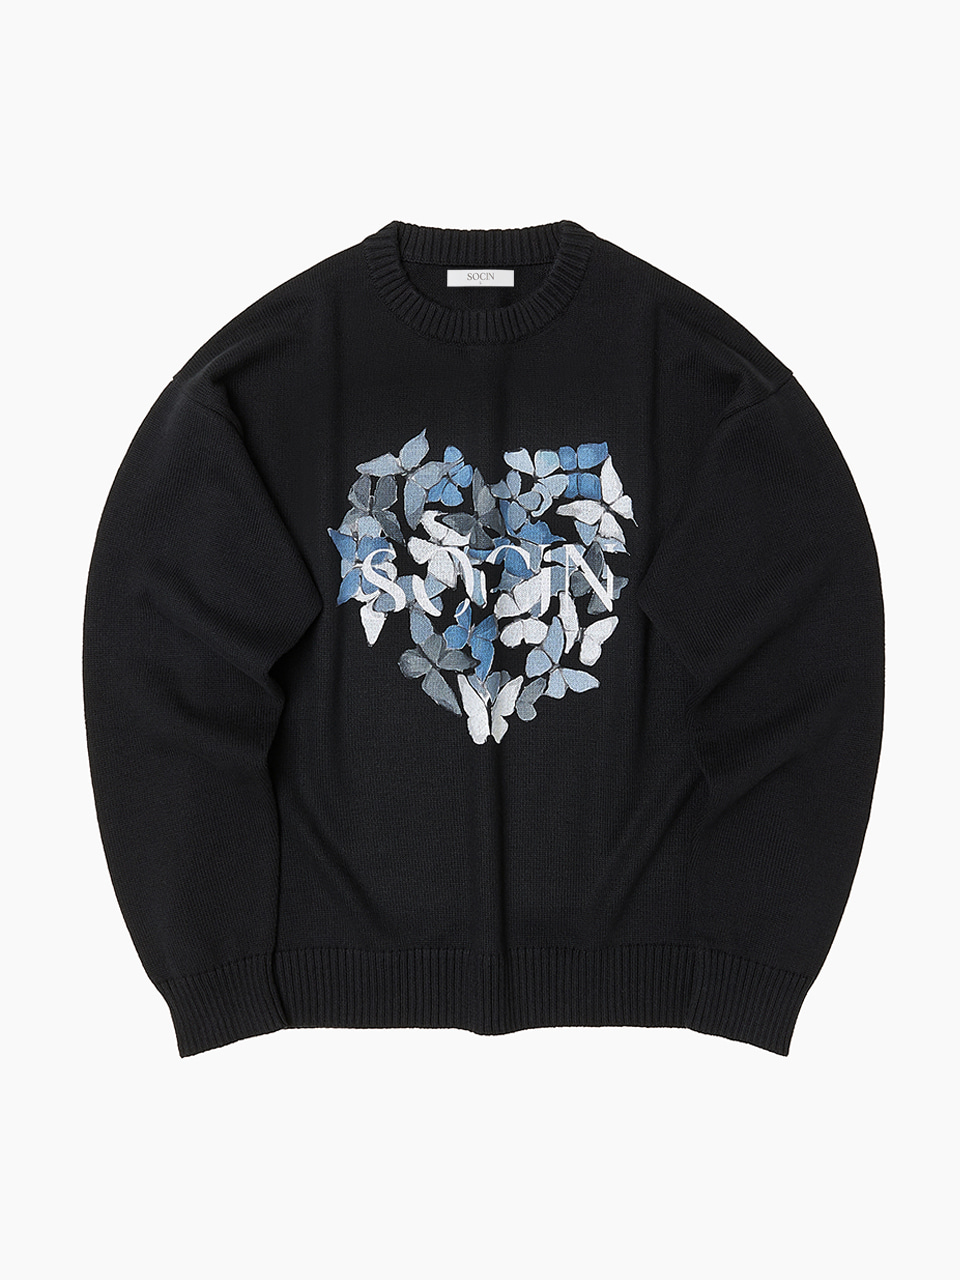 Abstract Butterfly Printed Knit (Black)